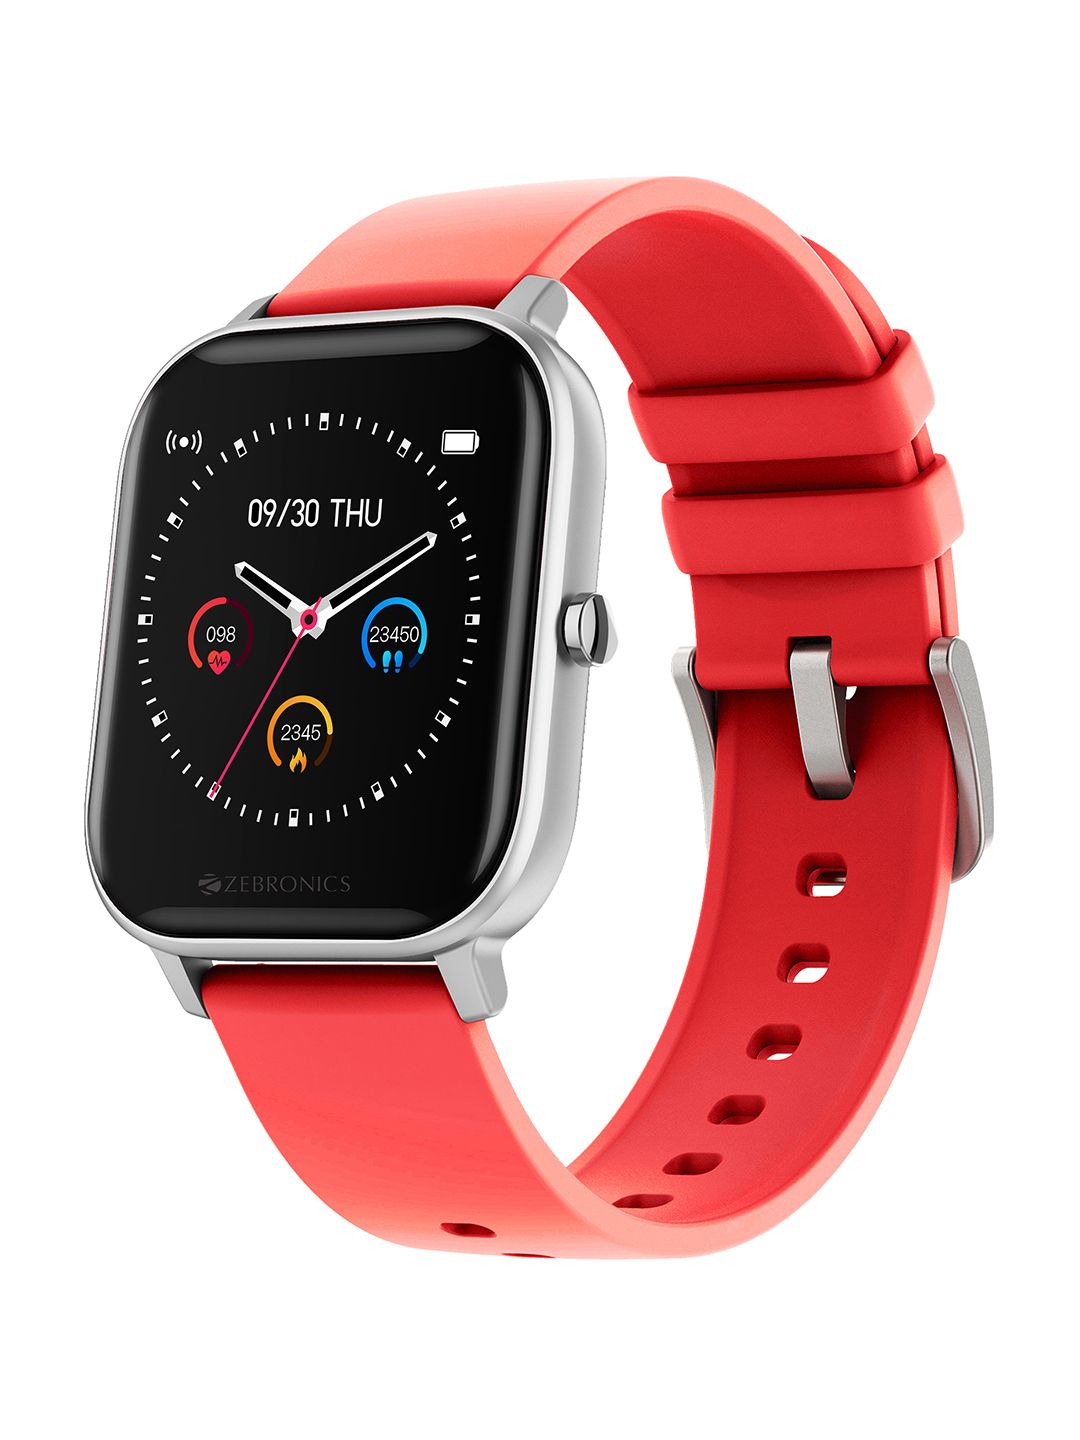 ZEBRONICS Red Fit 920CH Smart Watch Price in India